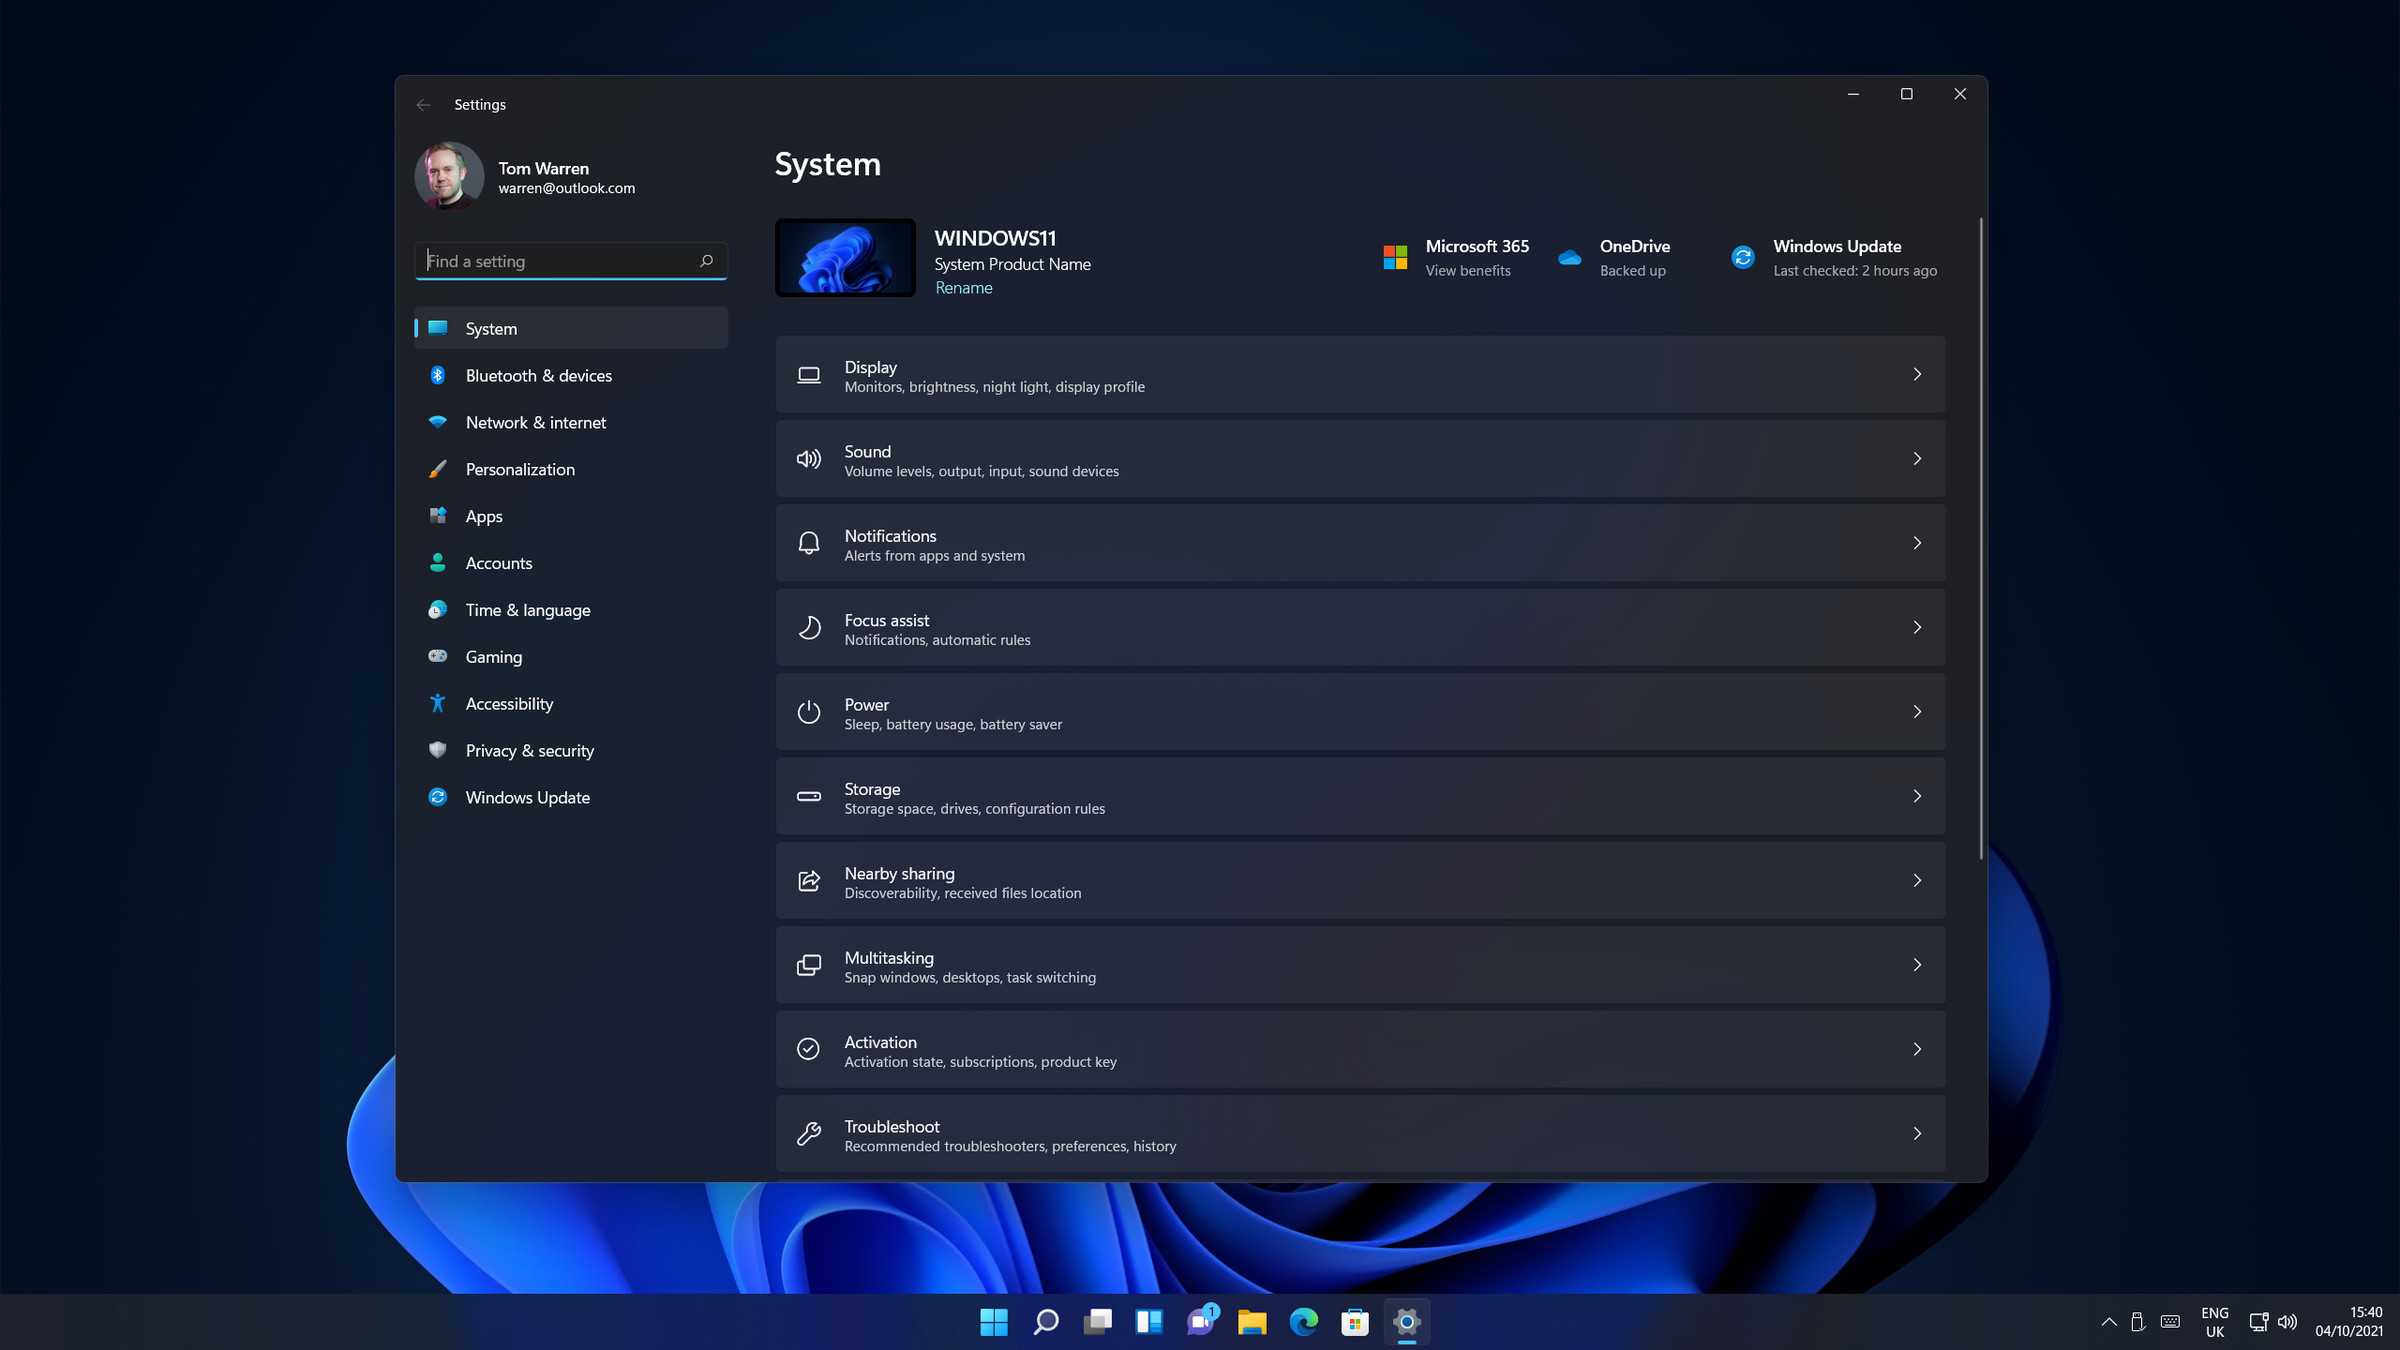 Settings in Windows 11 has been greatly improved.